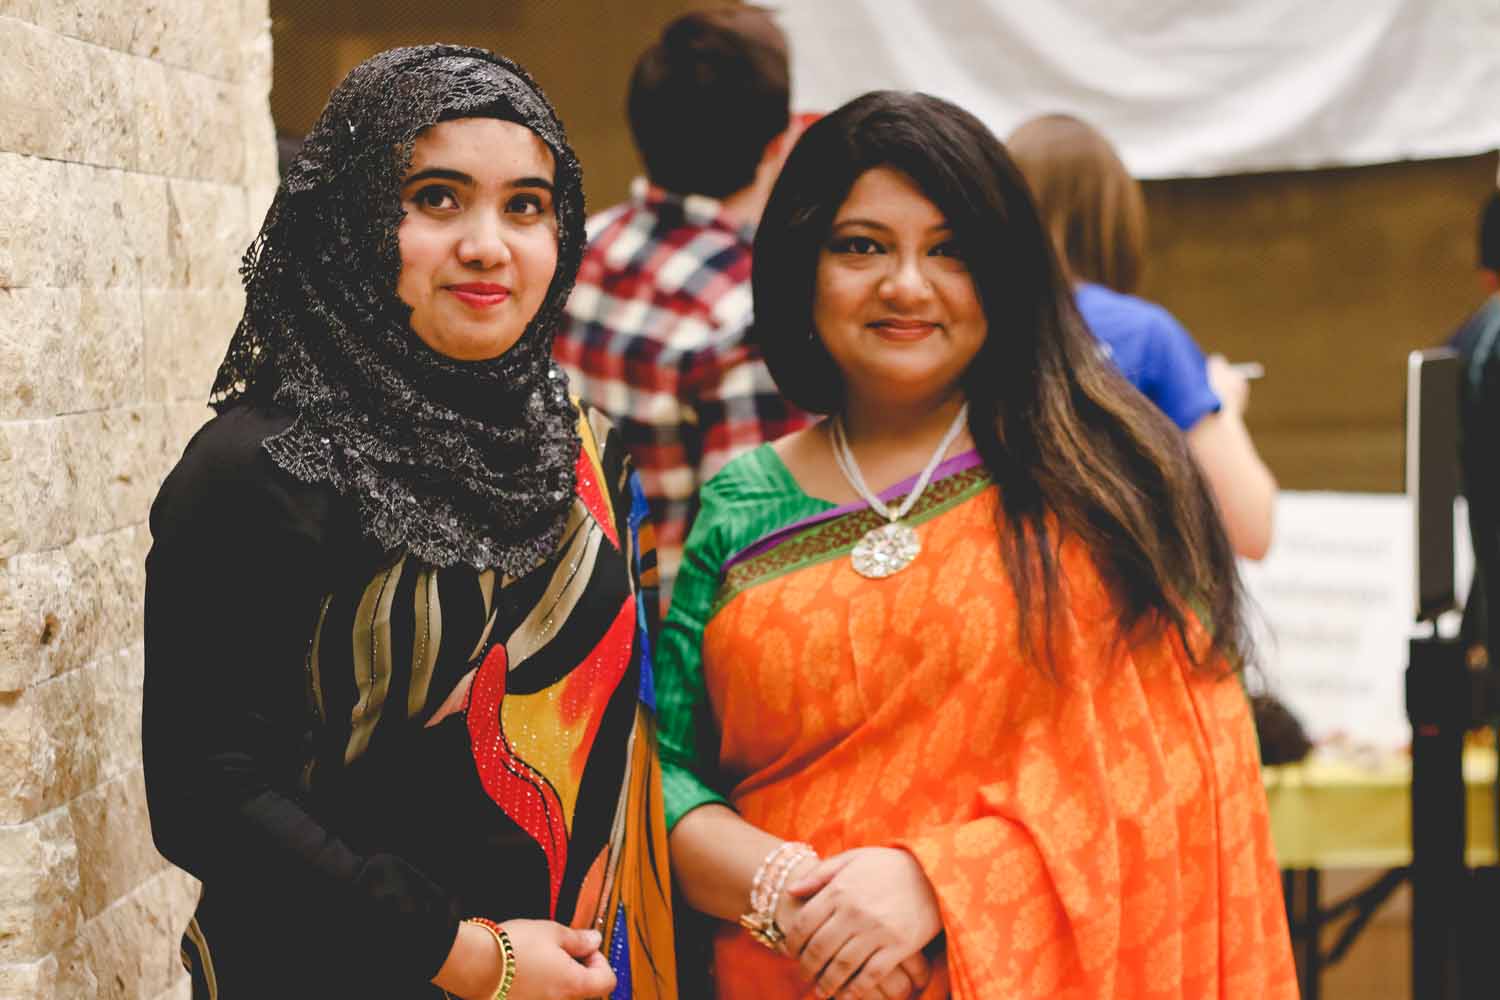 Sadia Aketer and Mouly Shahreen pose for a photo at the International Welcome Party. Photo by Hanna Yowell.